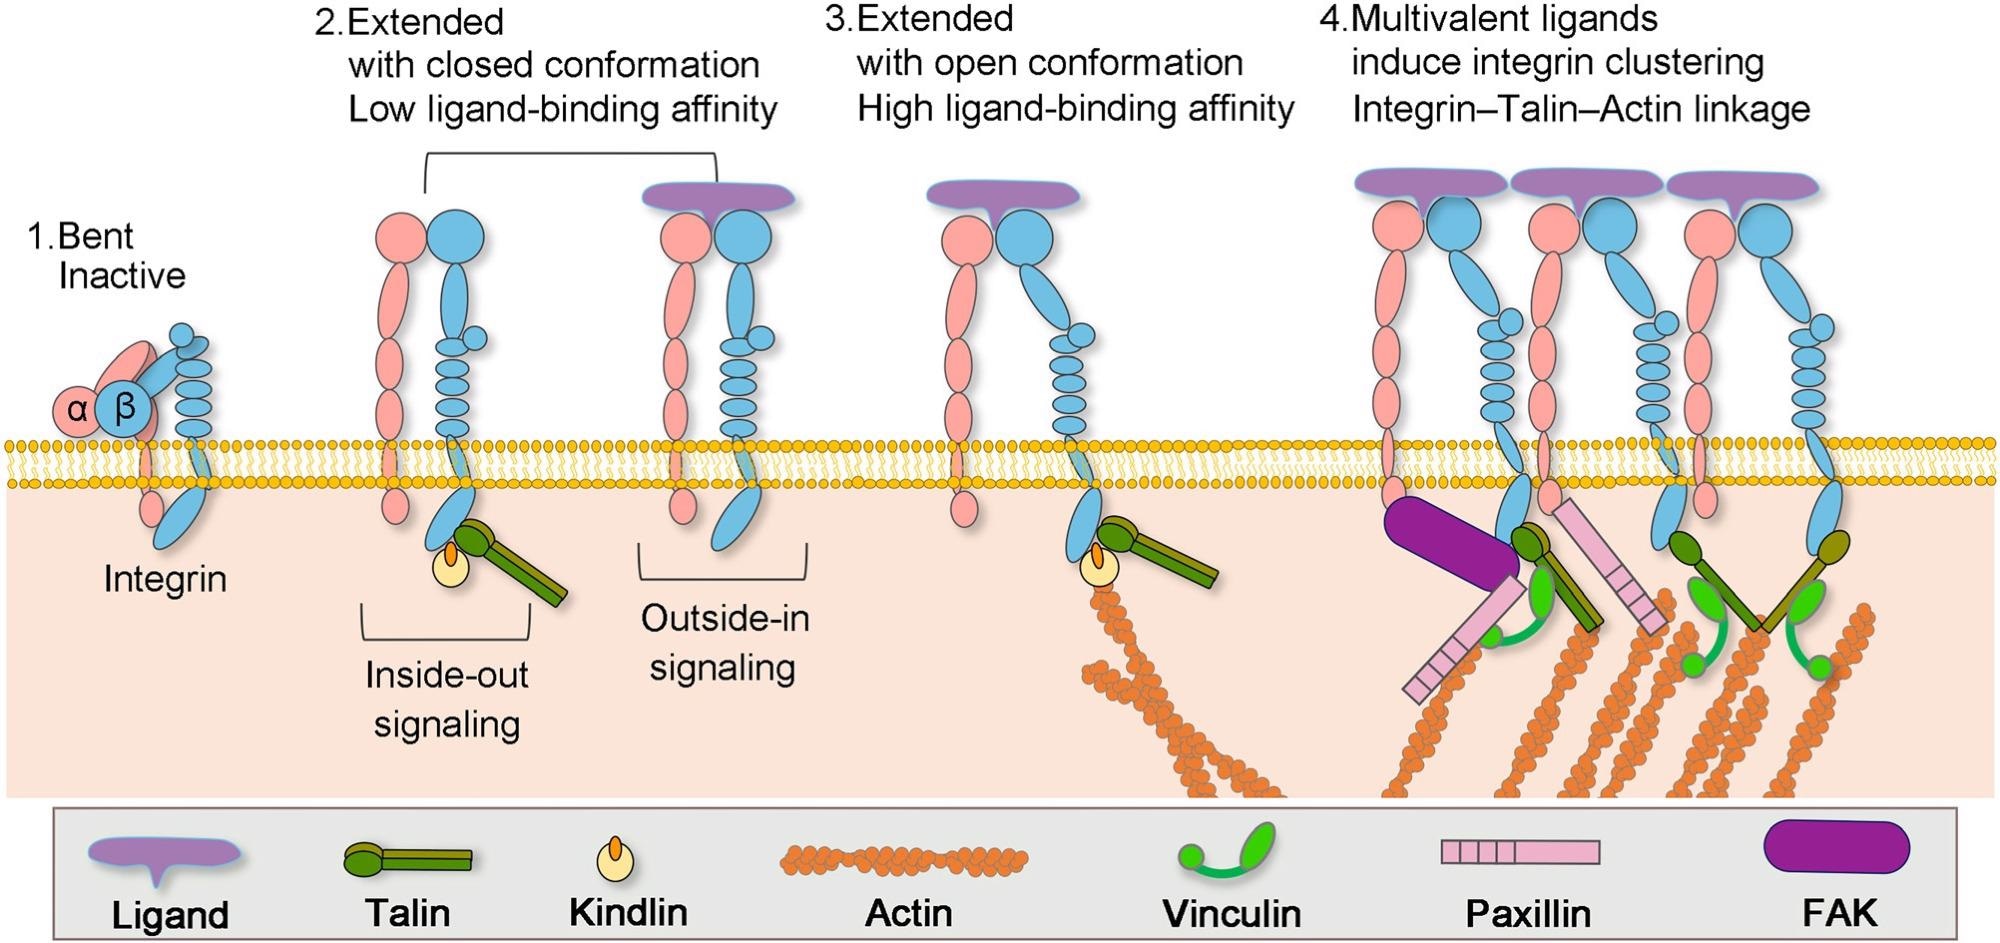 Formation of actin–integrin linkage and integrin activation. Step 1: low-affinity integrin has an inactive, bent conformation. Step 2: inside-out integrin activation by cytoplasmic proteins or outside-in integrin activation via ECM ligands leads to complete extension of the extracellular domains. Step 3: the open, high-affinity activated integrin has the cytoplasmic leg domains separated and links to actin cytoskeleton via talin. Step 4: multivalent ligand binding induces clustering of integrins.